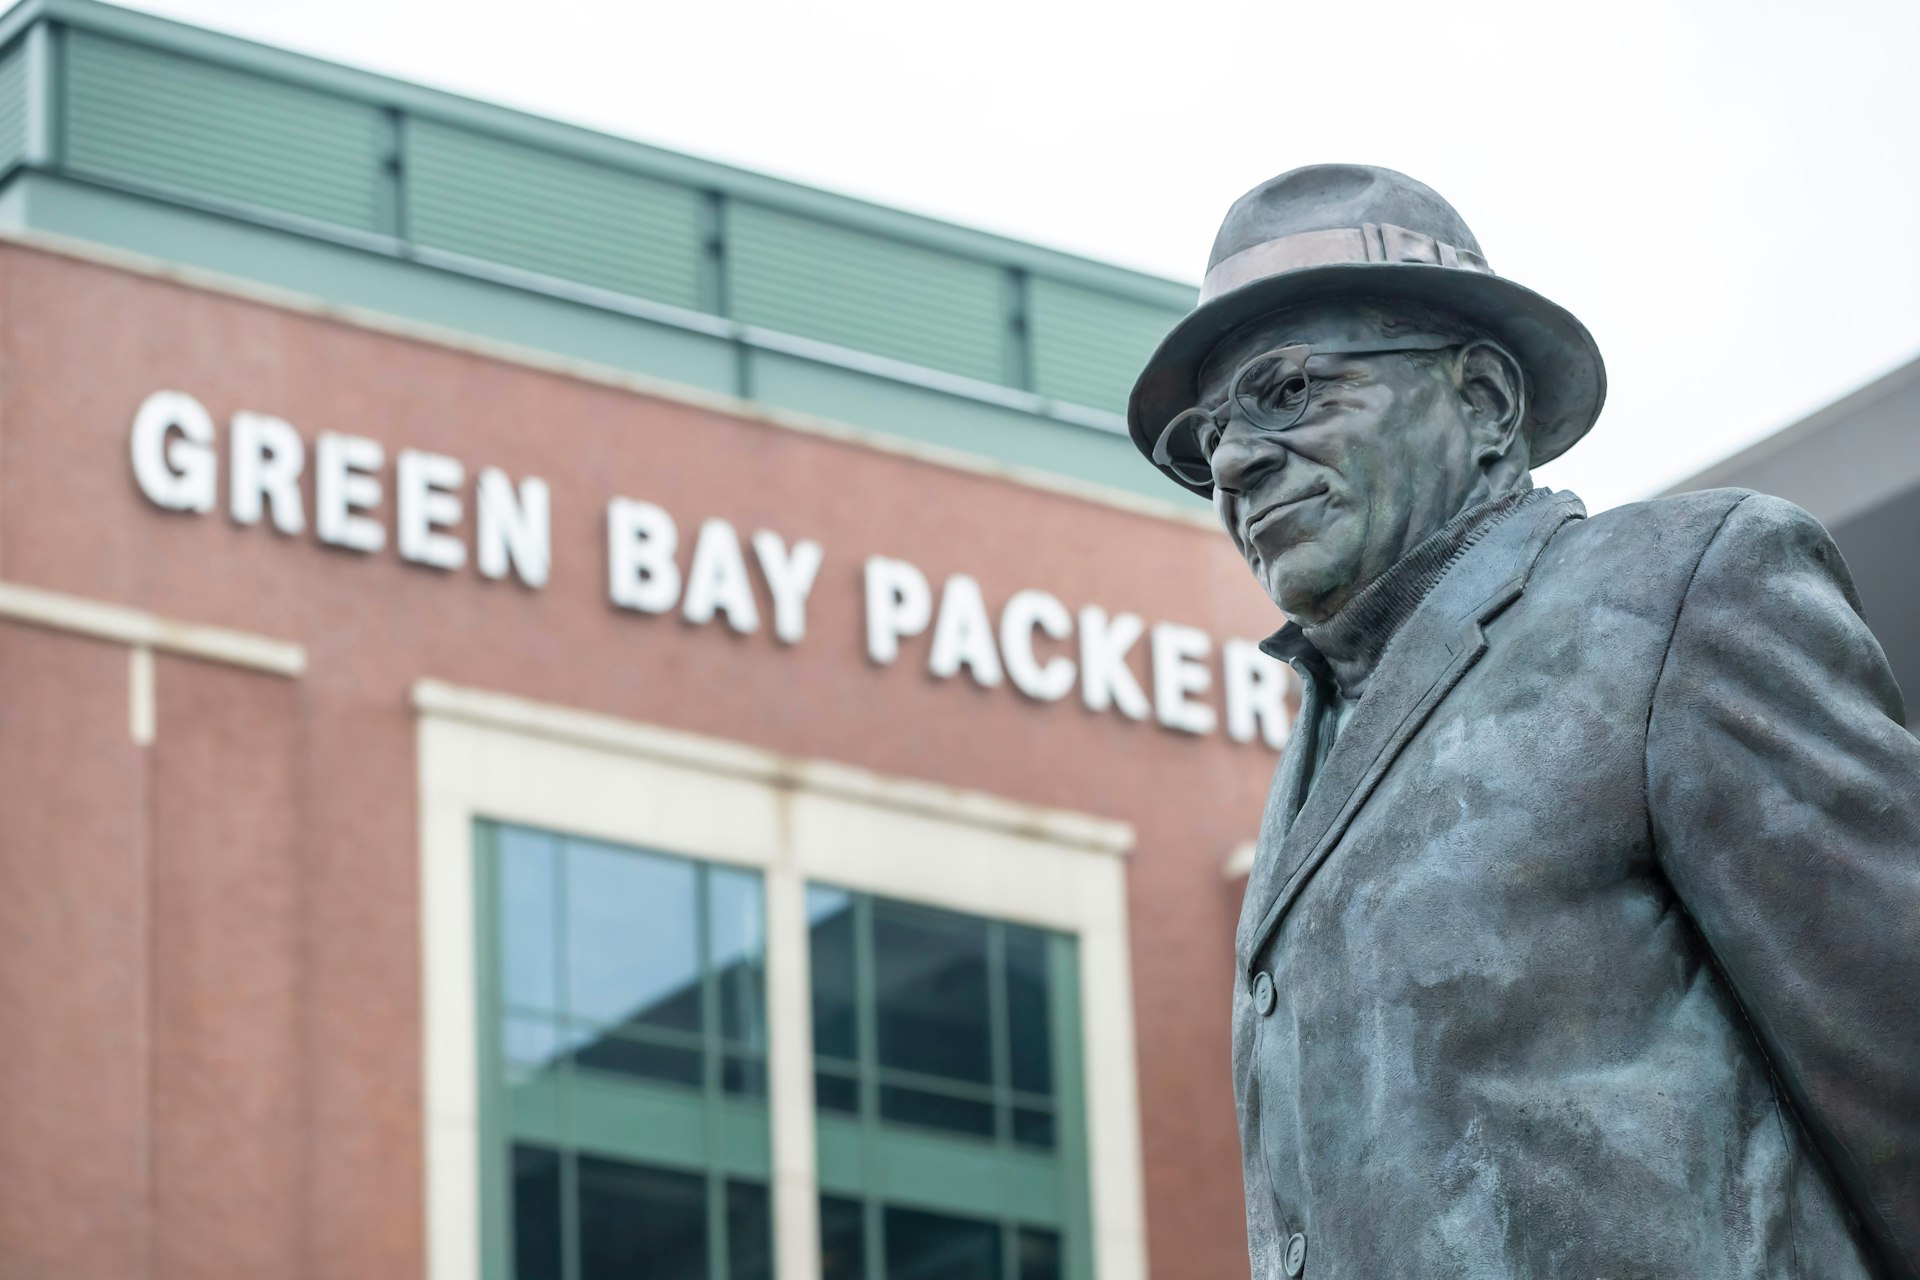 A statue of Vince Lombardi in front of a sign reading "Green Bay Packers"